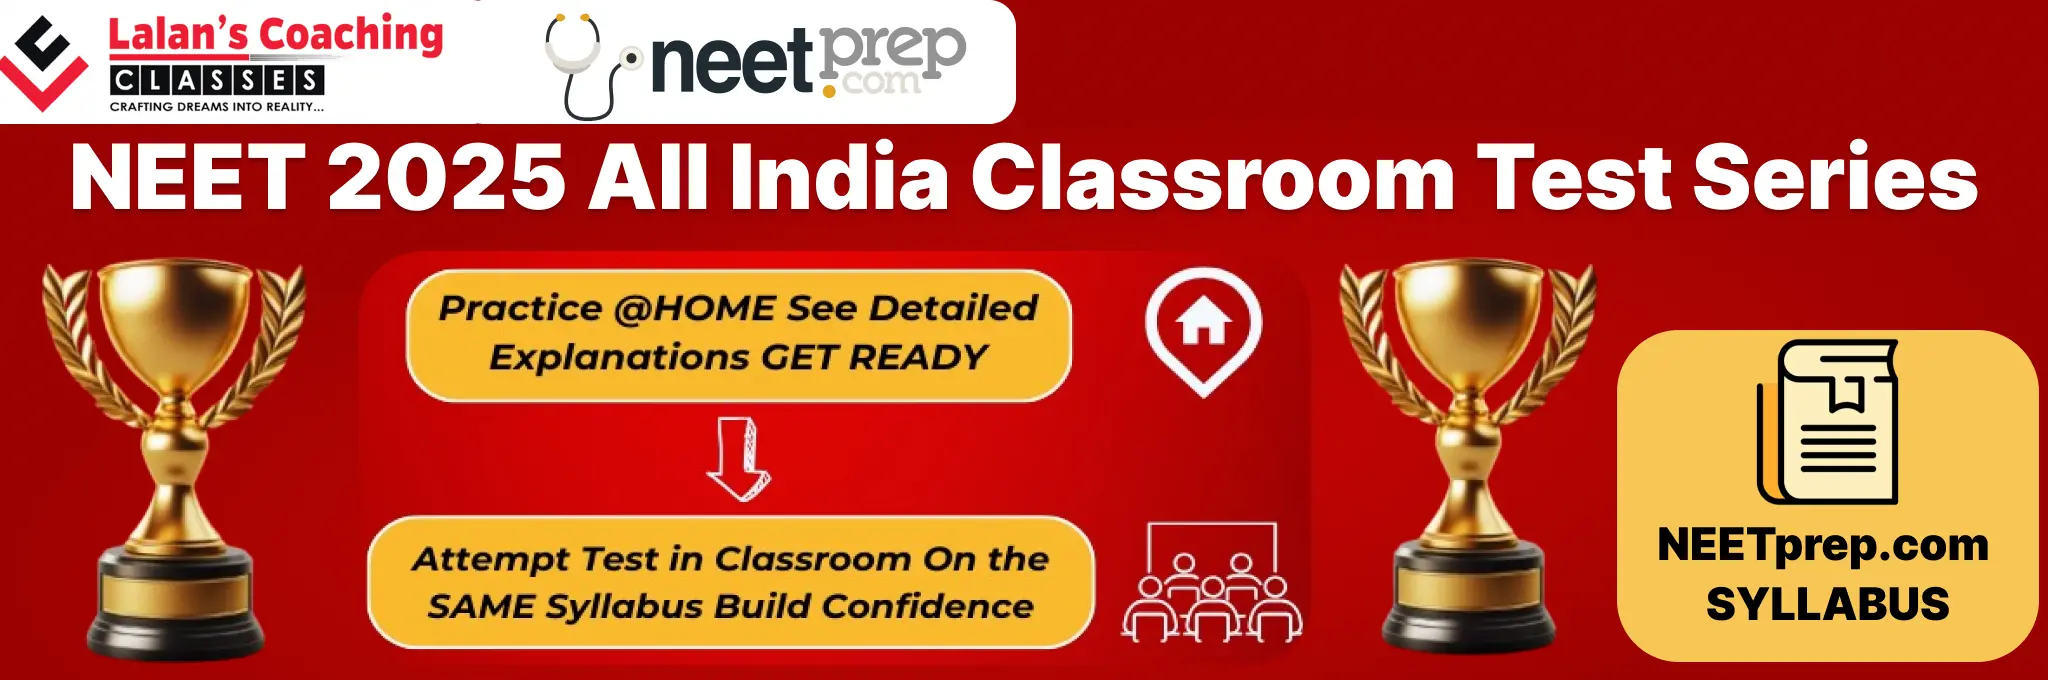 NEET 2025 All India classroom test series with Lalans coaching classes & Neetpre.com